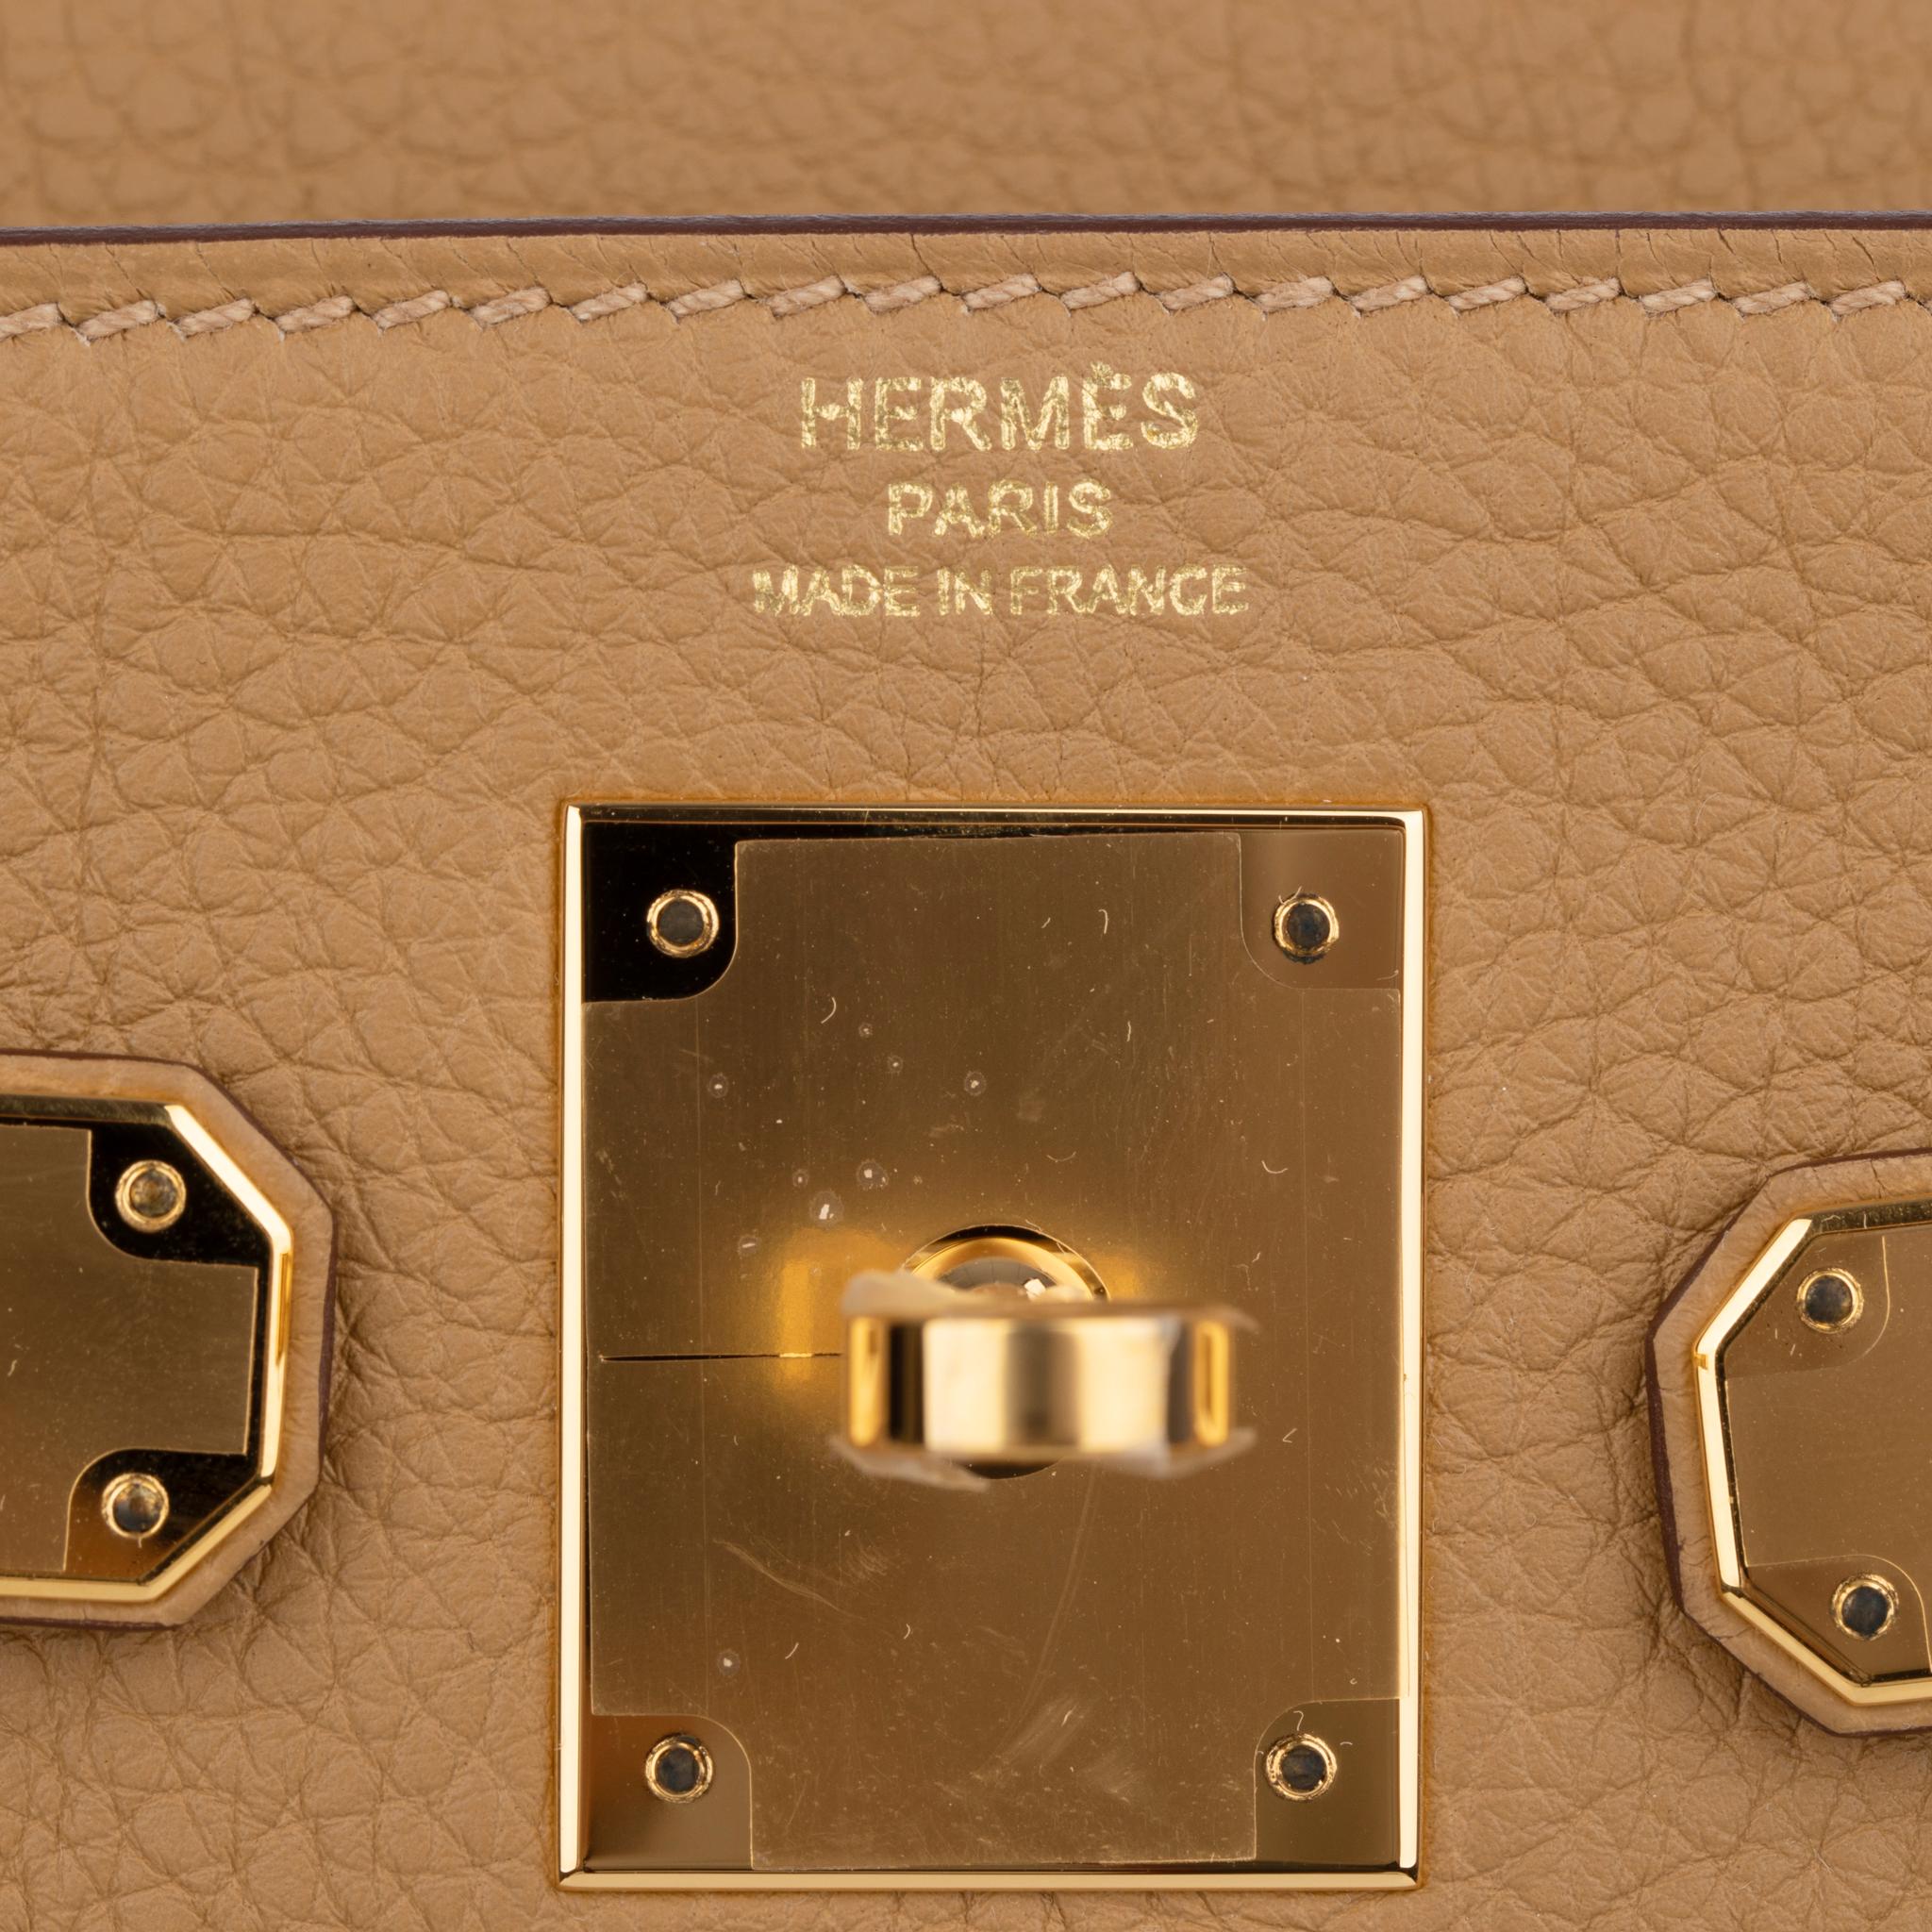 The Hermes Kelly 28cm in Biscuit Togo Leather with Gold Hardware is a harmonious blend of understated luxury and impeccable craftsmanship.

Handcrafted by Hermes artisans, this iconic bag exudes sophistication with its timeless design. The Biscuit